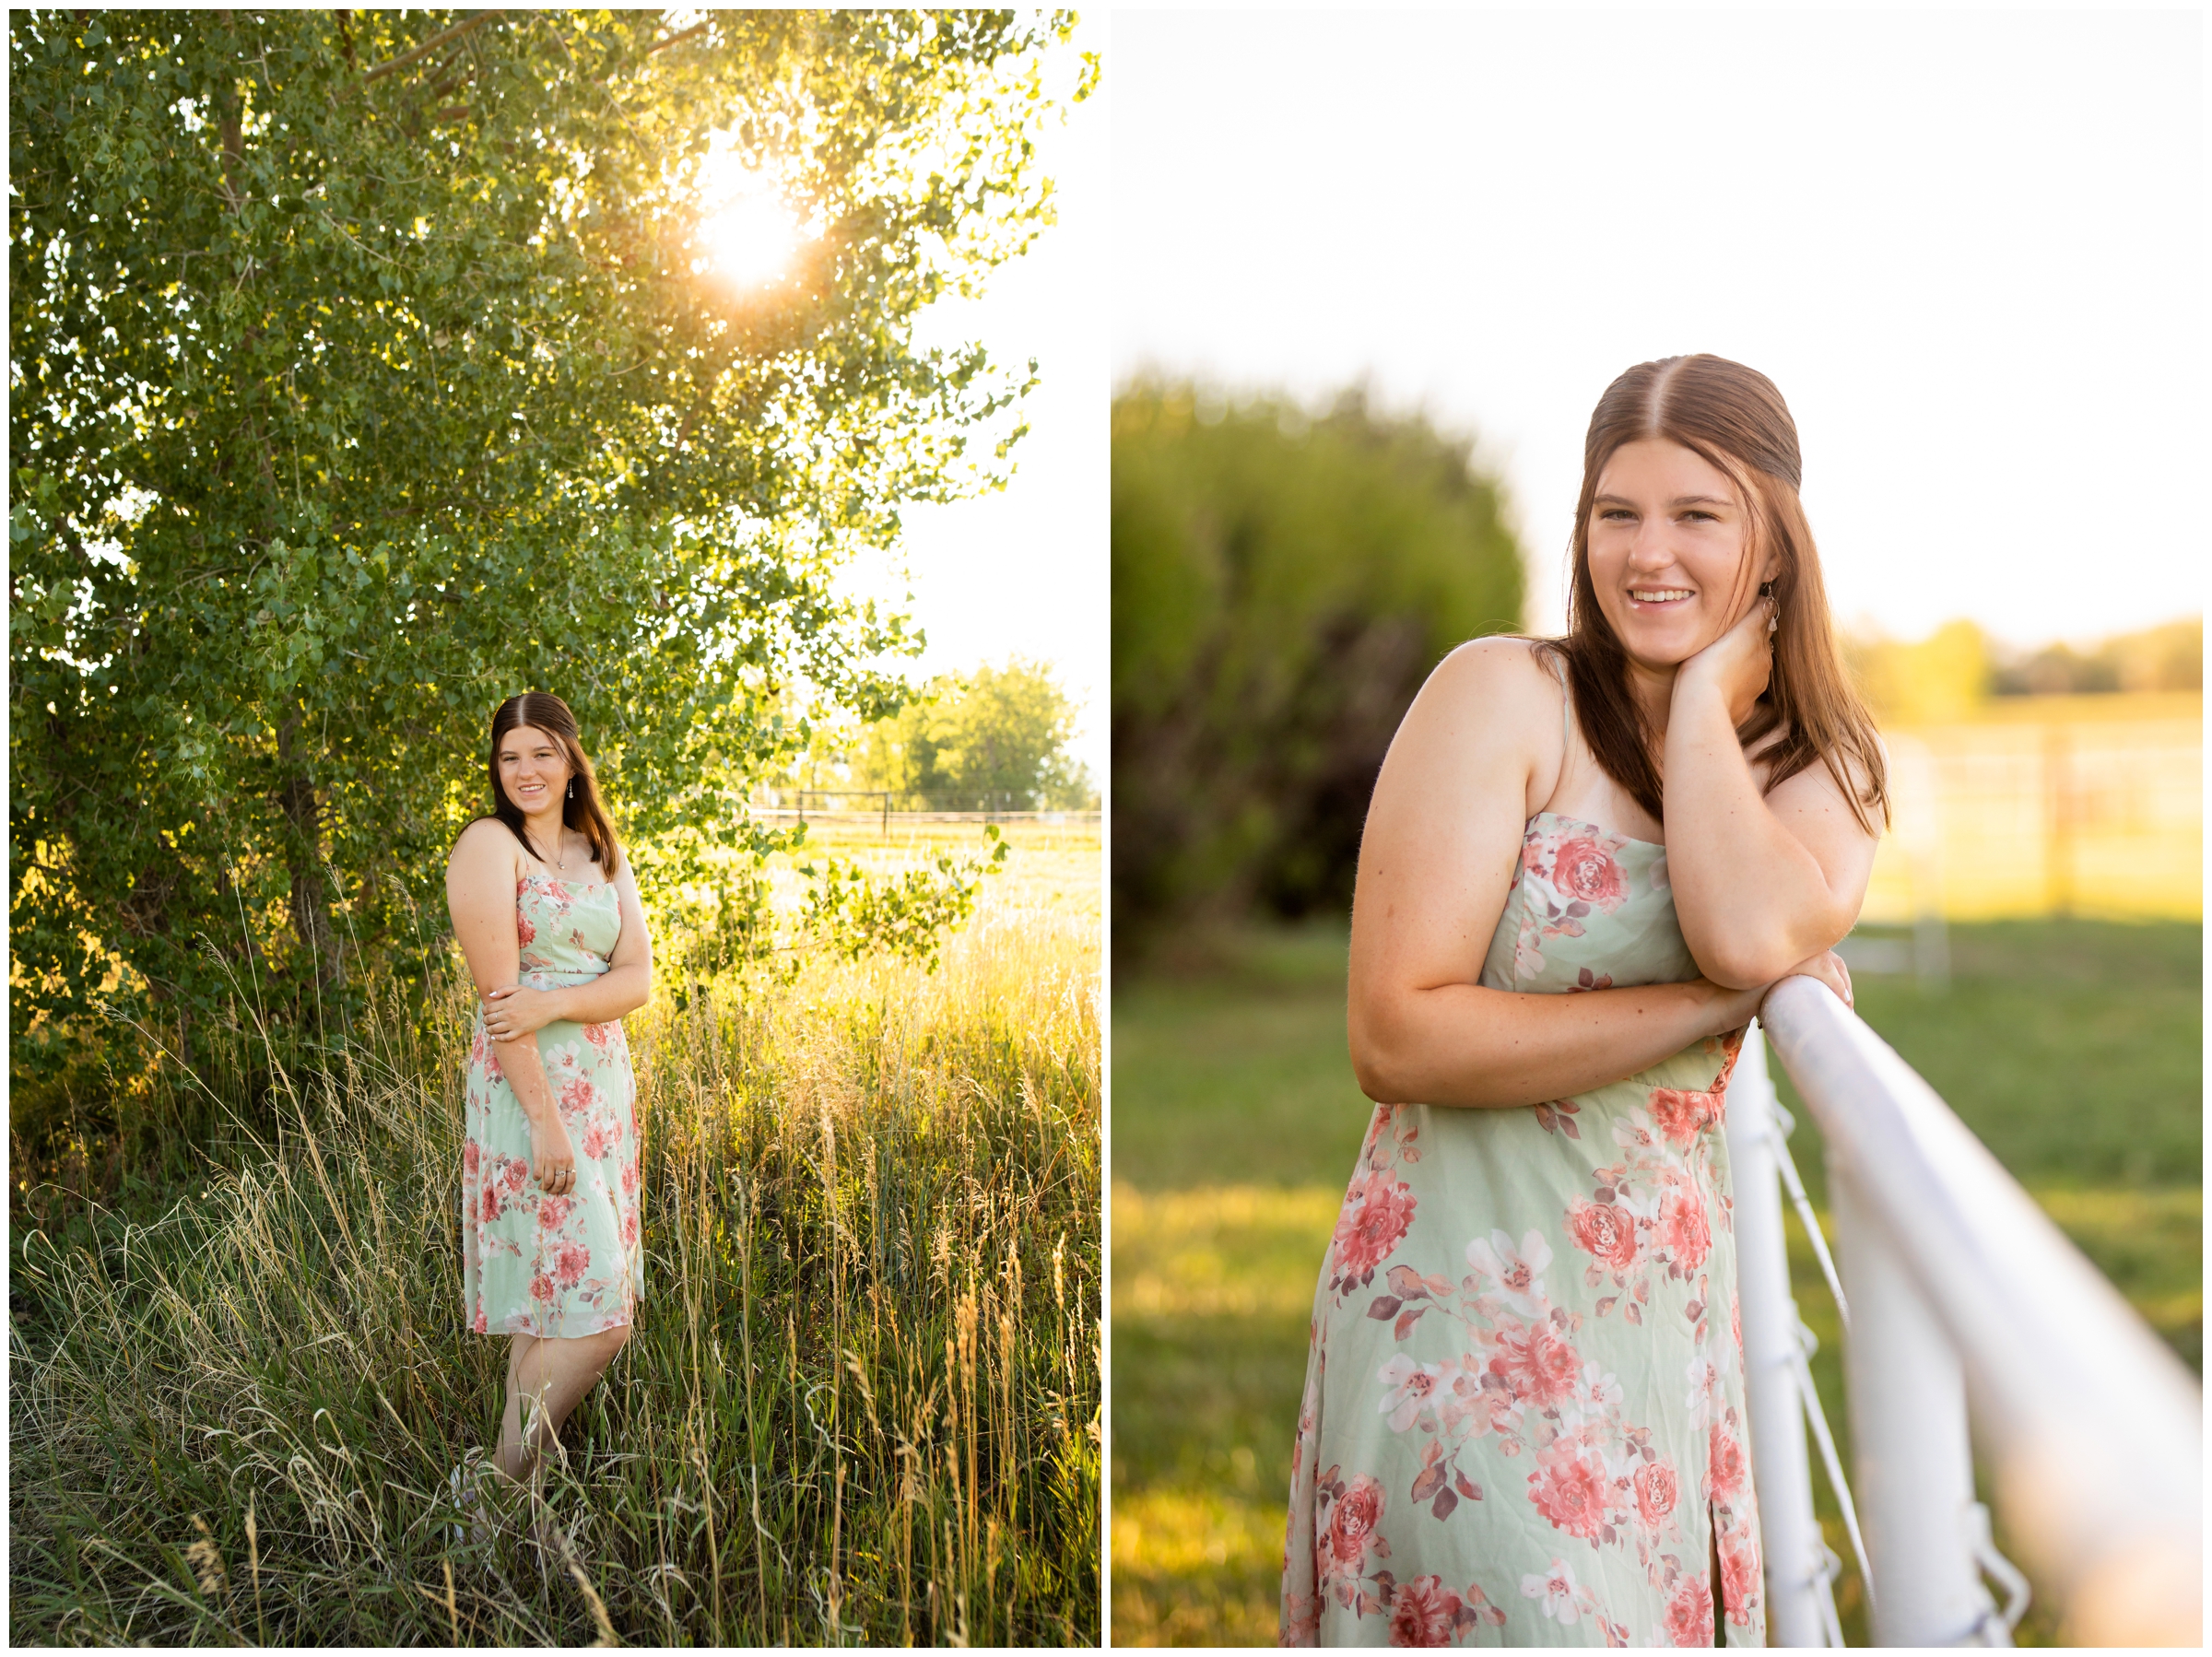 Longmont graduation photography session during summer at a farm